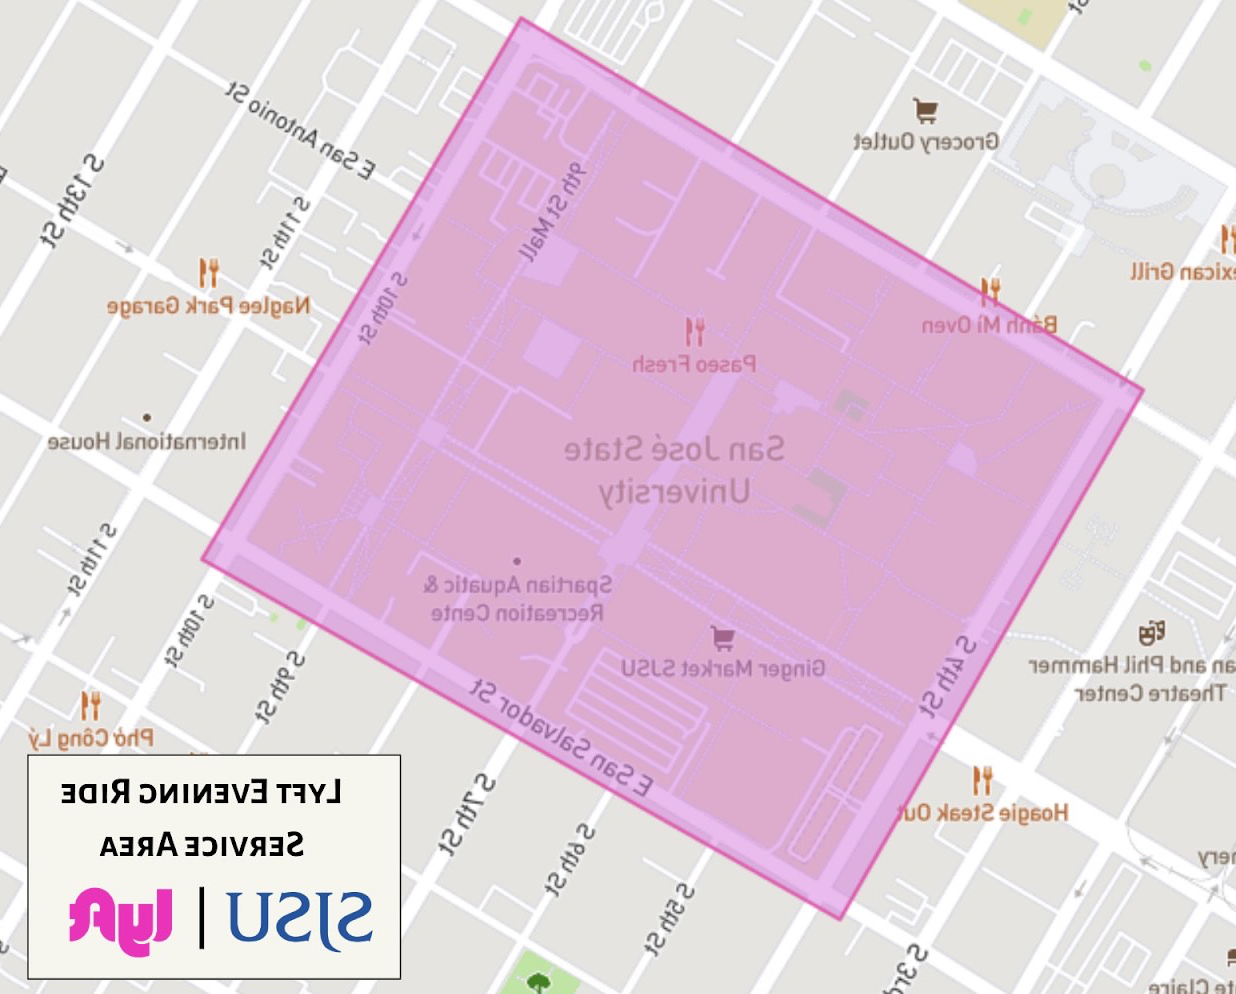 map of sjsu with pink highlight of campus and vicinity to show the borders of the lyft service